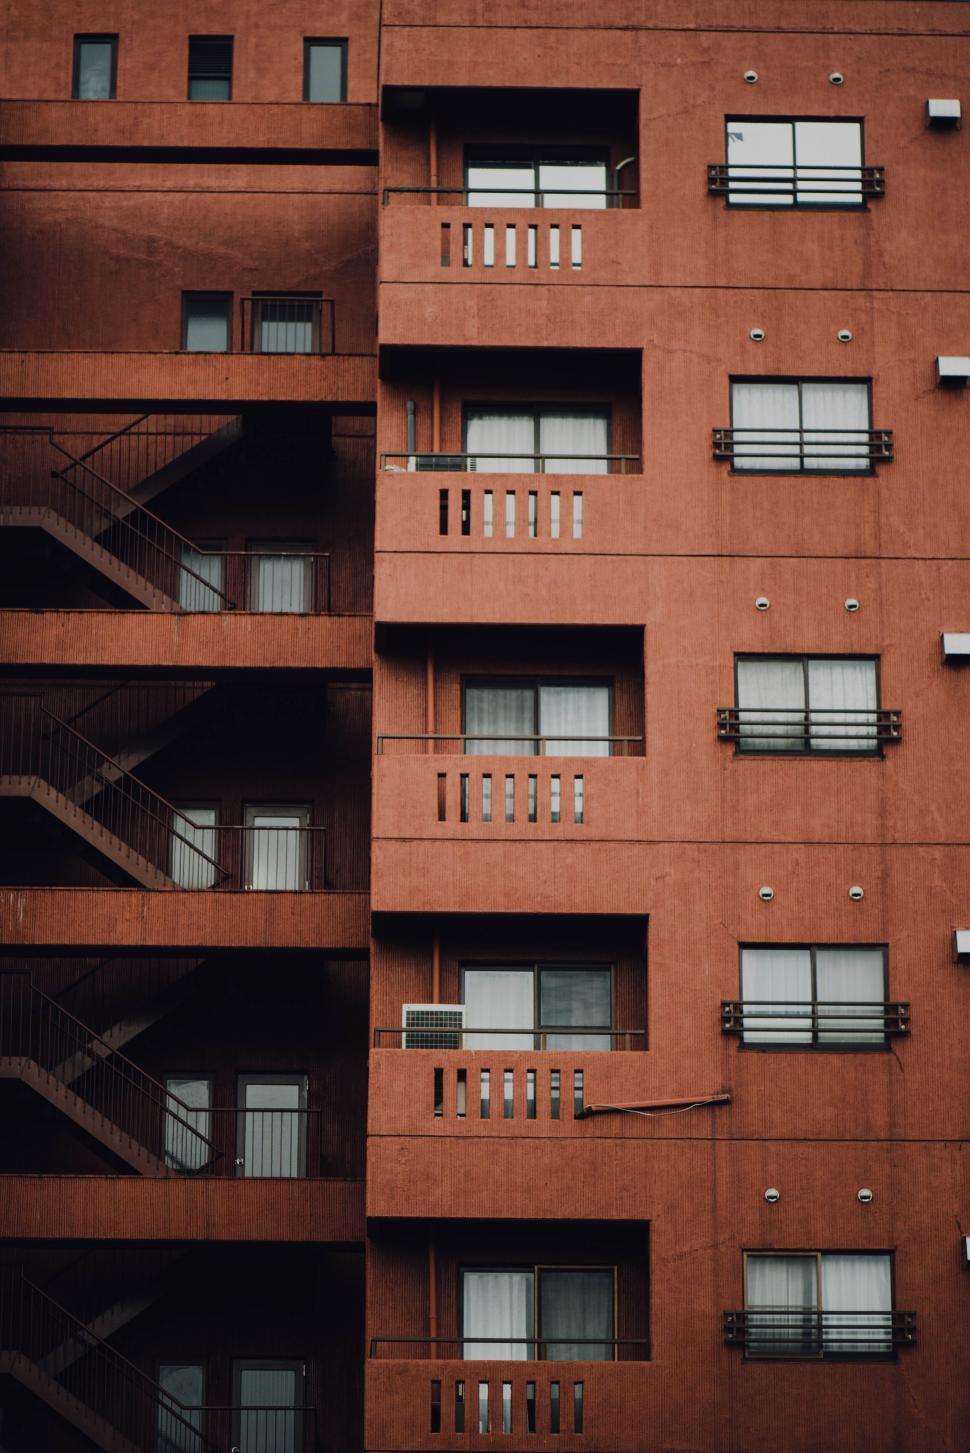 Free Image of Tall Red Building With Balconies and Windows 